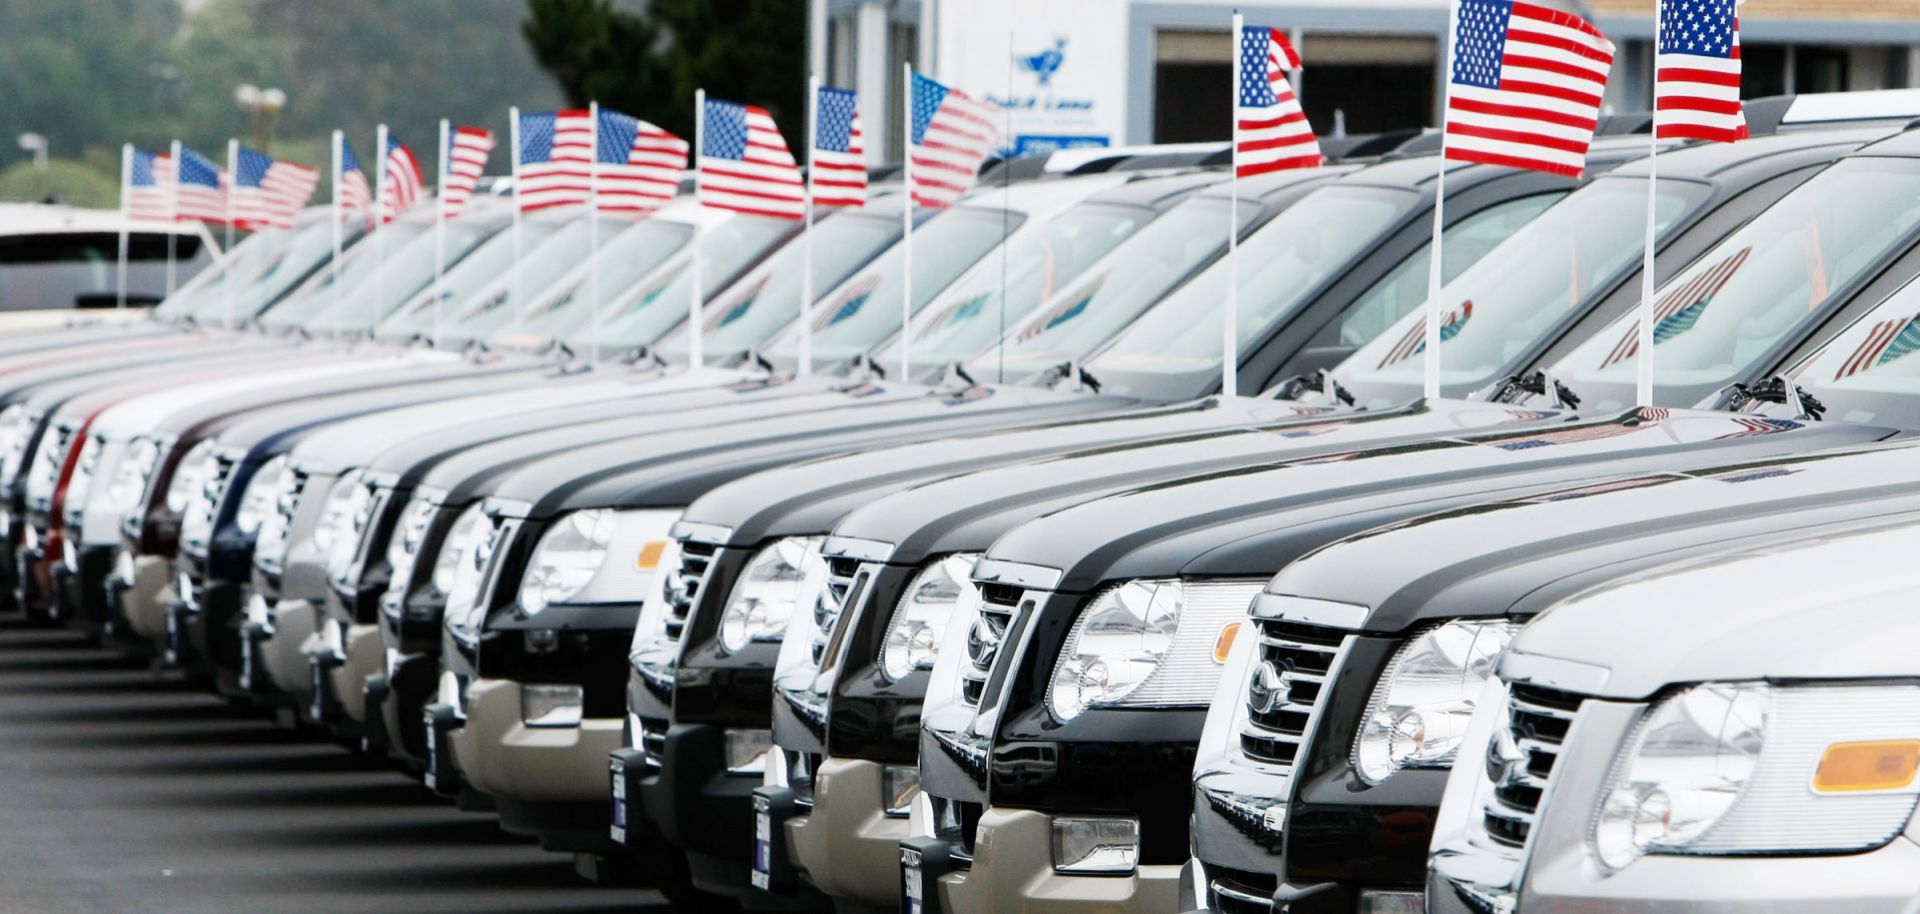 For several years, car sales have kept pace with the rise in auto loans. But now the market for new and used cars may have reached its saturation point, a development that bodes ill for the auto lending sector.